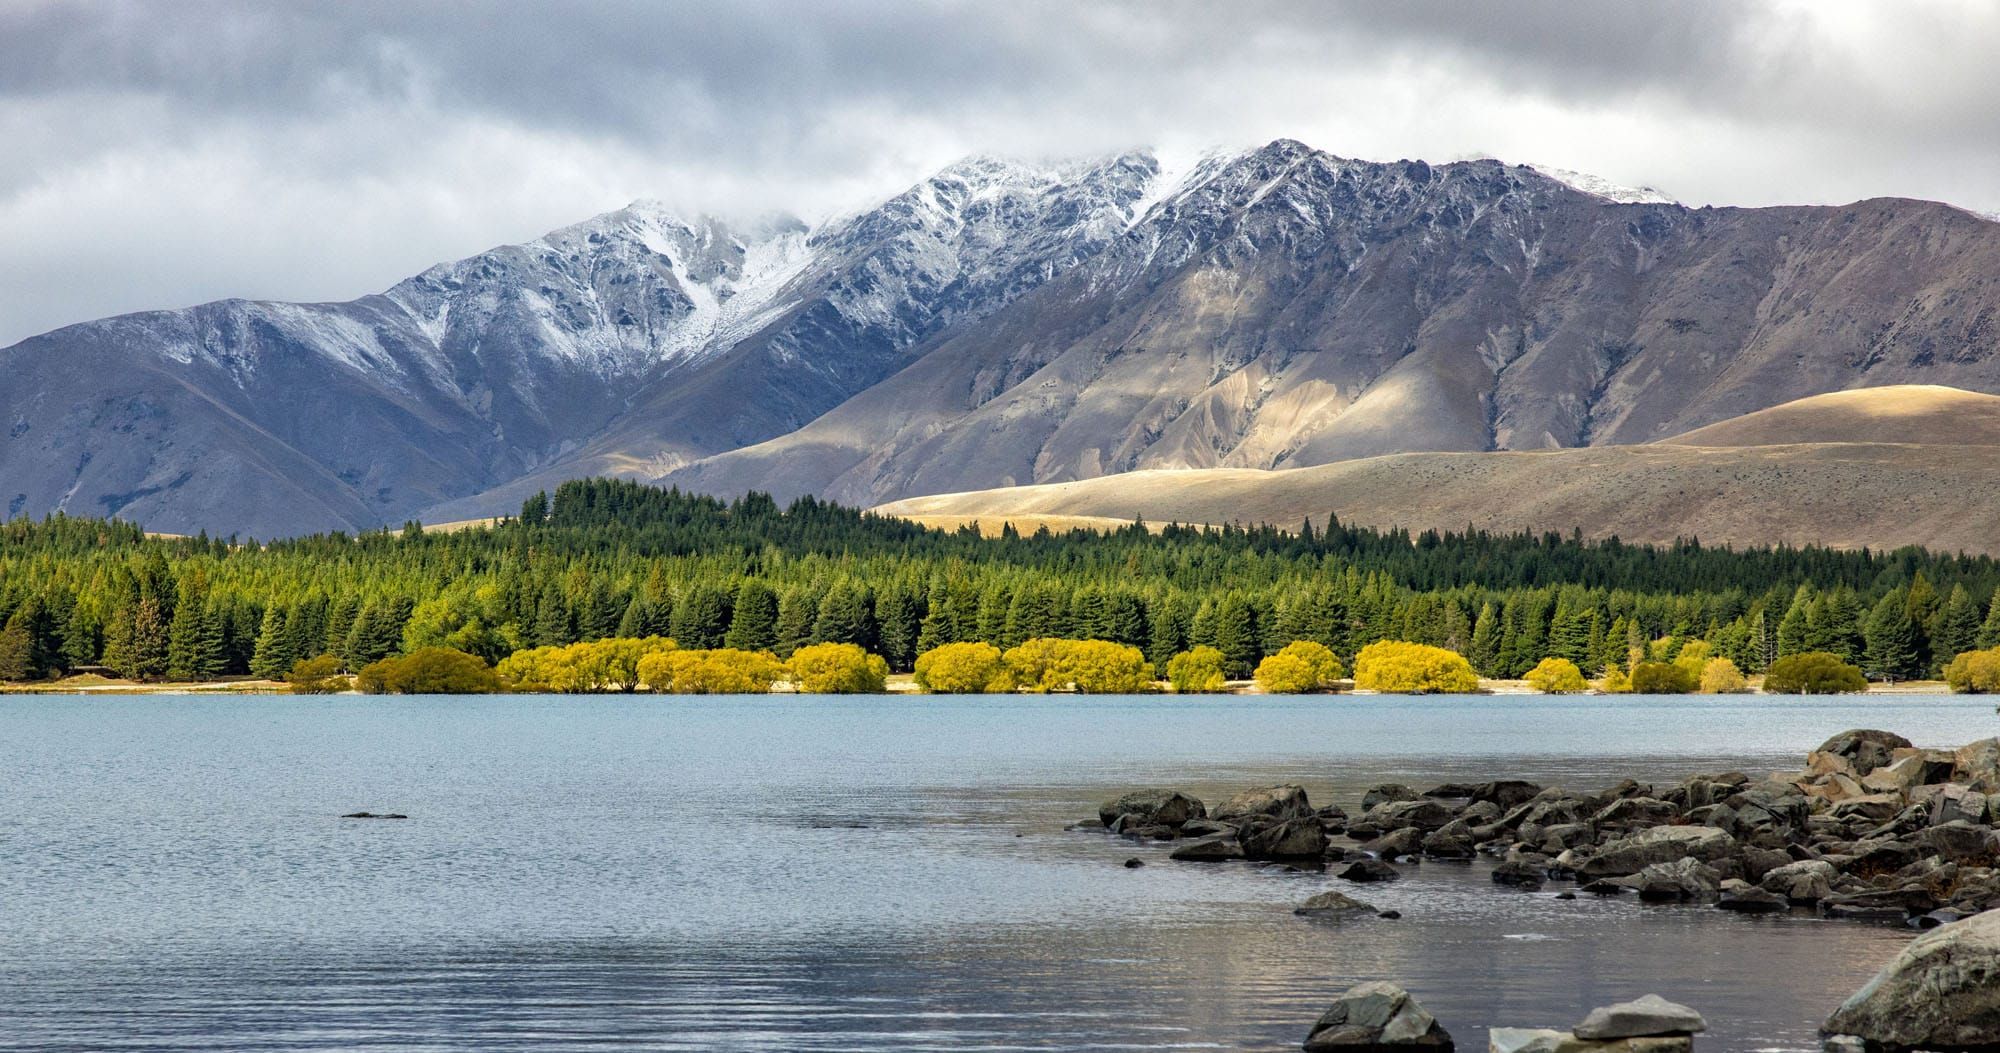 Featured image for “One Week on the South Island of New Zealand: 4 Ways to Plan Your Trip”